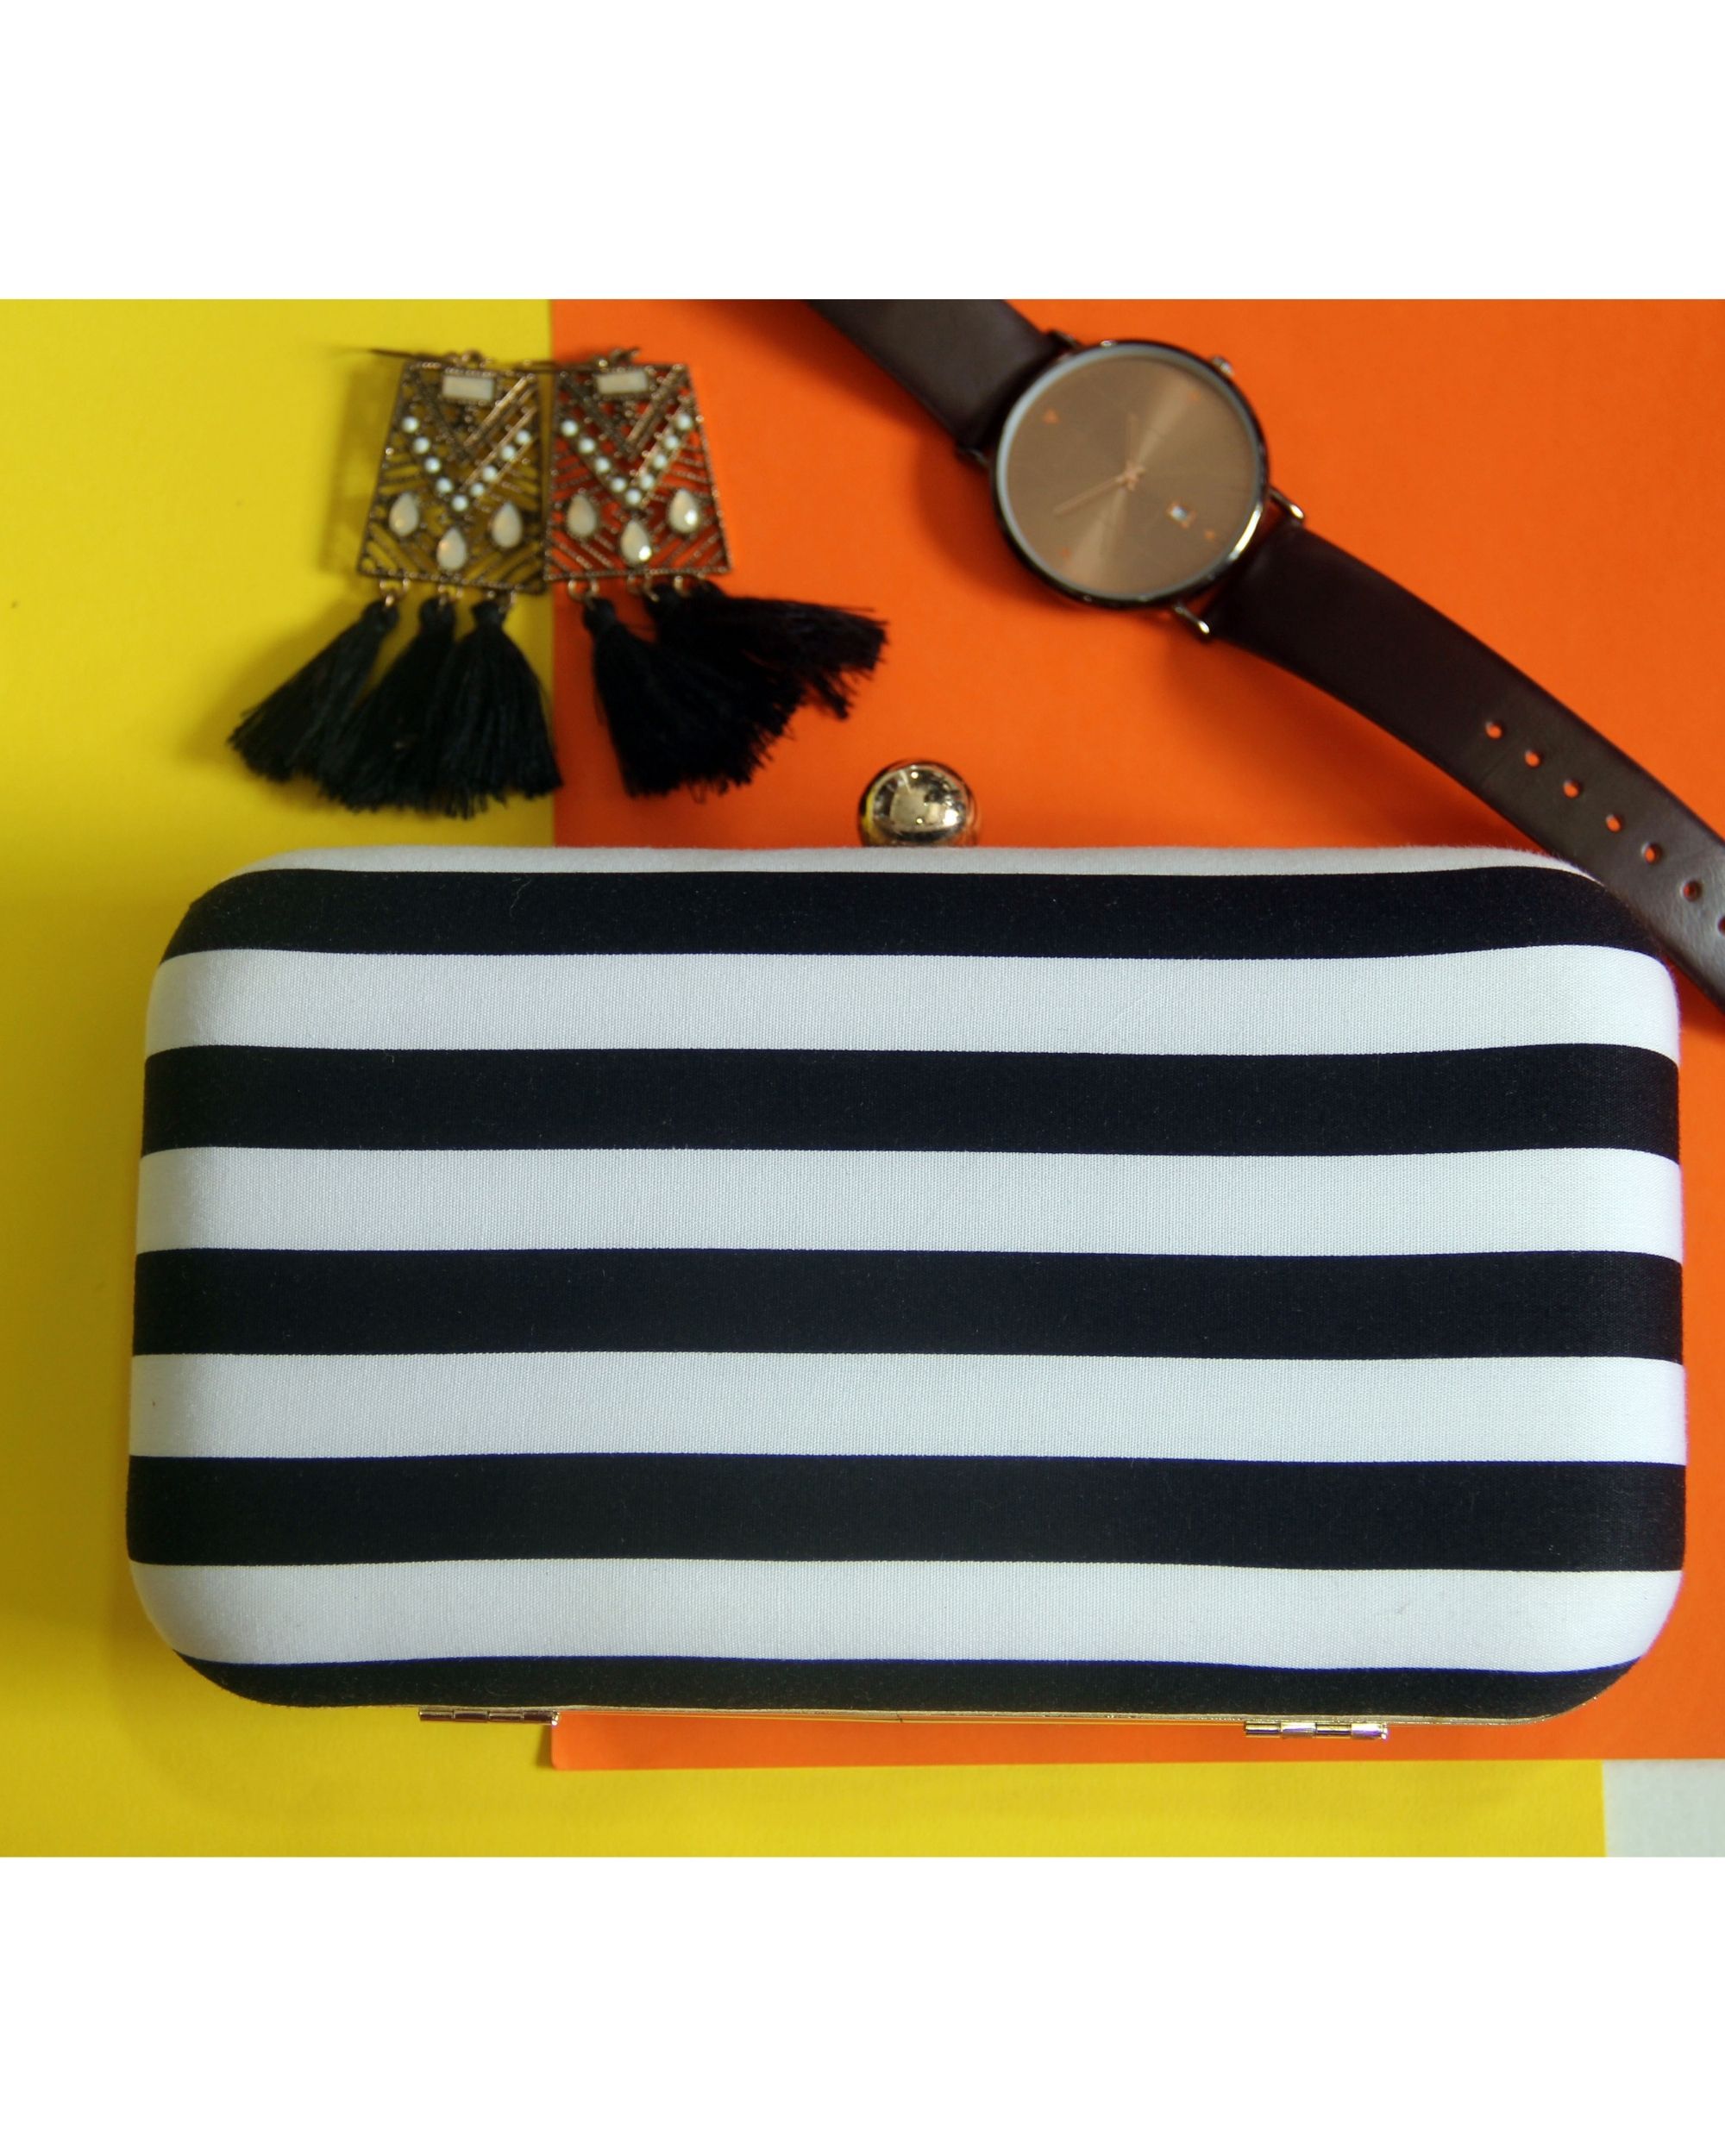 Monochrome Clutch Purse, Black and White Stripe Clutch Bag, Wedding Clutch  Bag, Party Clutch Bag, Handmade Clutch Bag, Ladies Gifts - Etsy